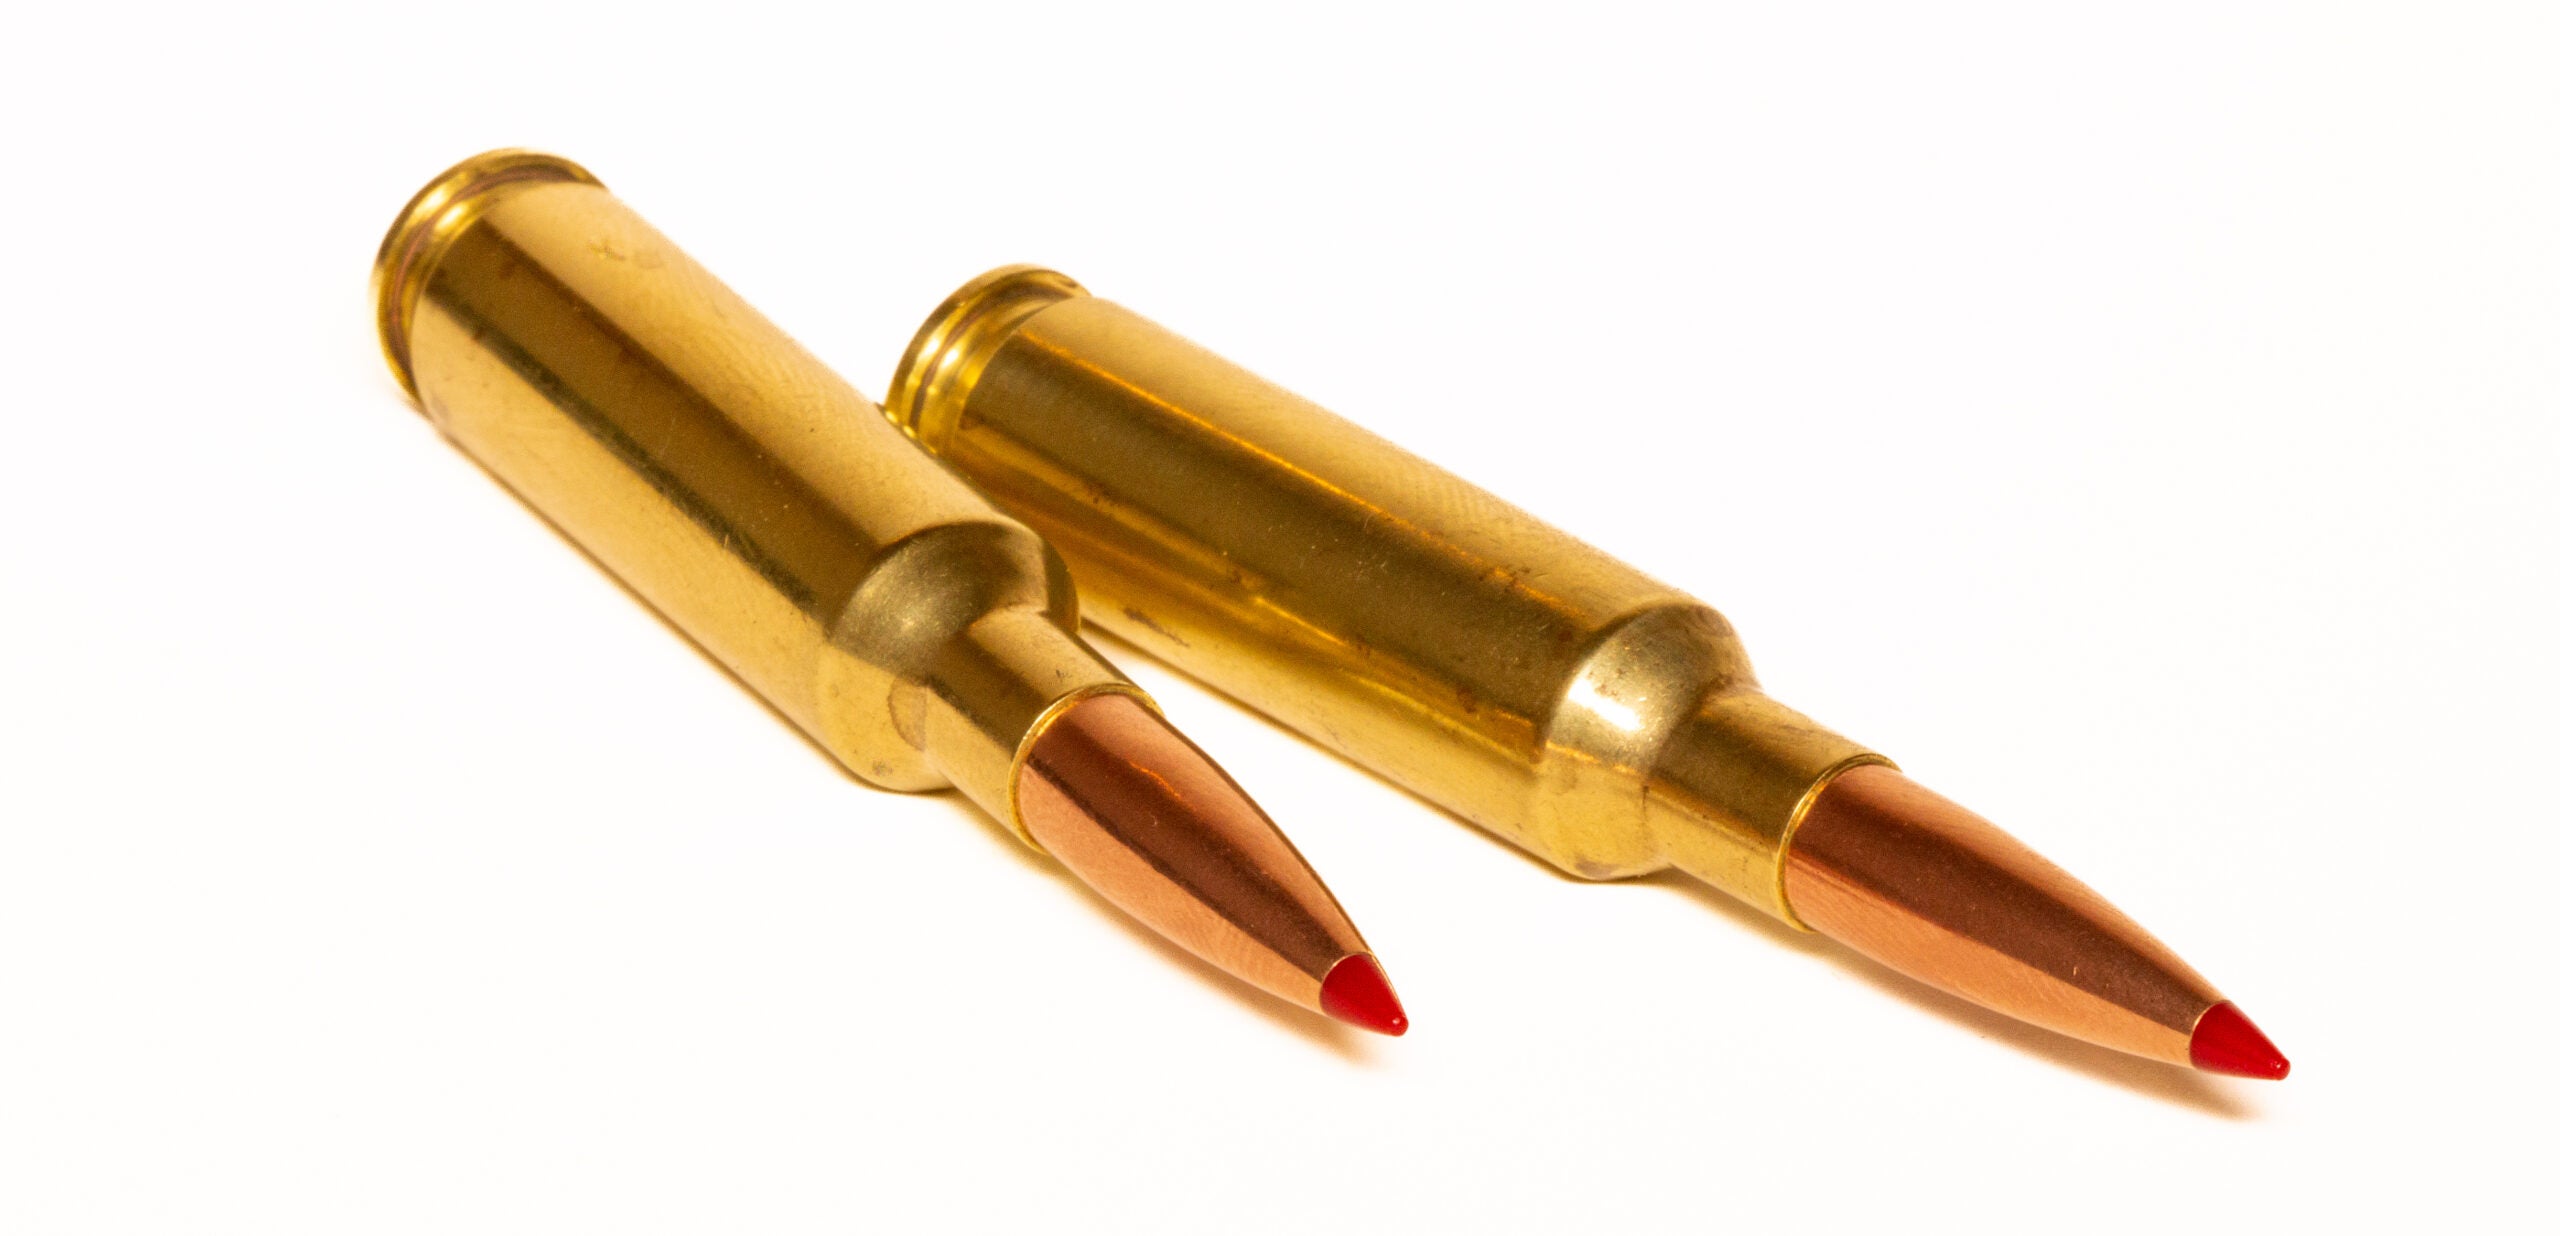 Two Hornady 6.5 Creedmoor cartridges on a white background.